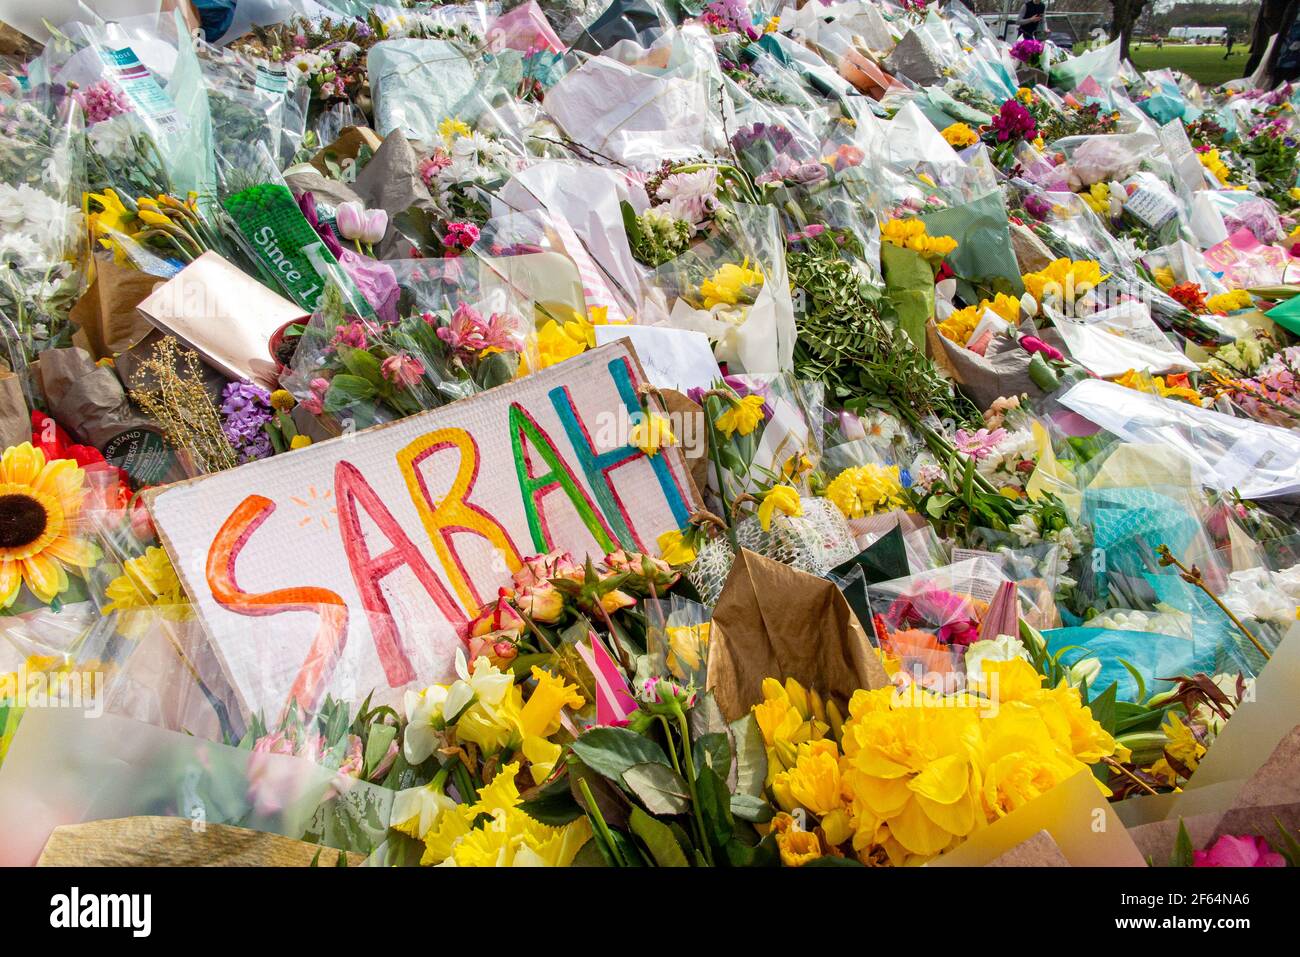 Clapham Common, London - shortly after the vigil and arrests by the poice, calmness prevails where flowers are laid in memory of Sarah Everard. Stock Photo